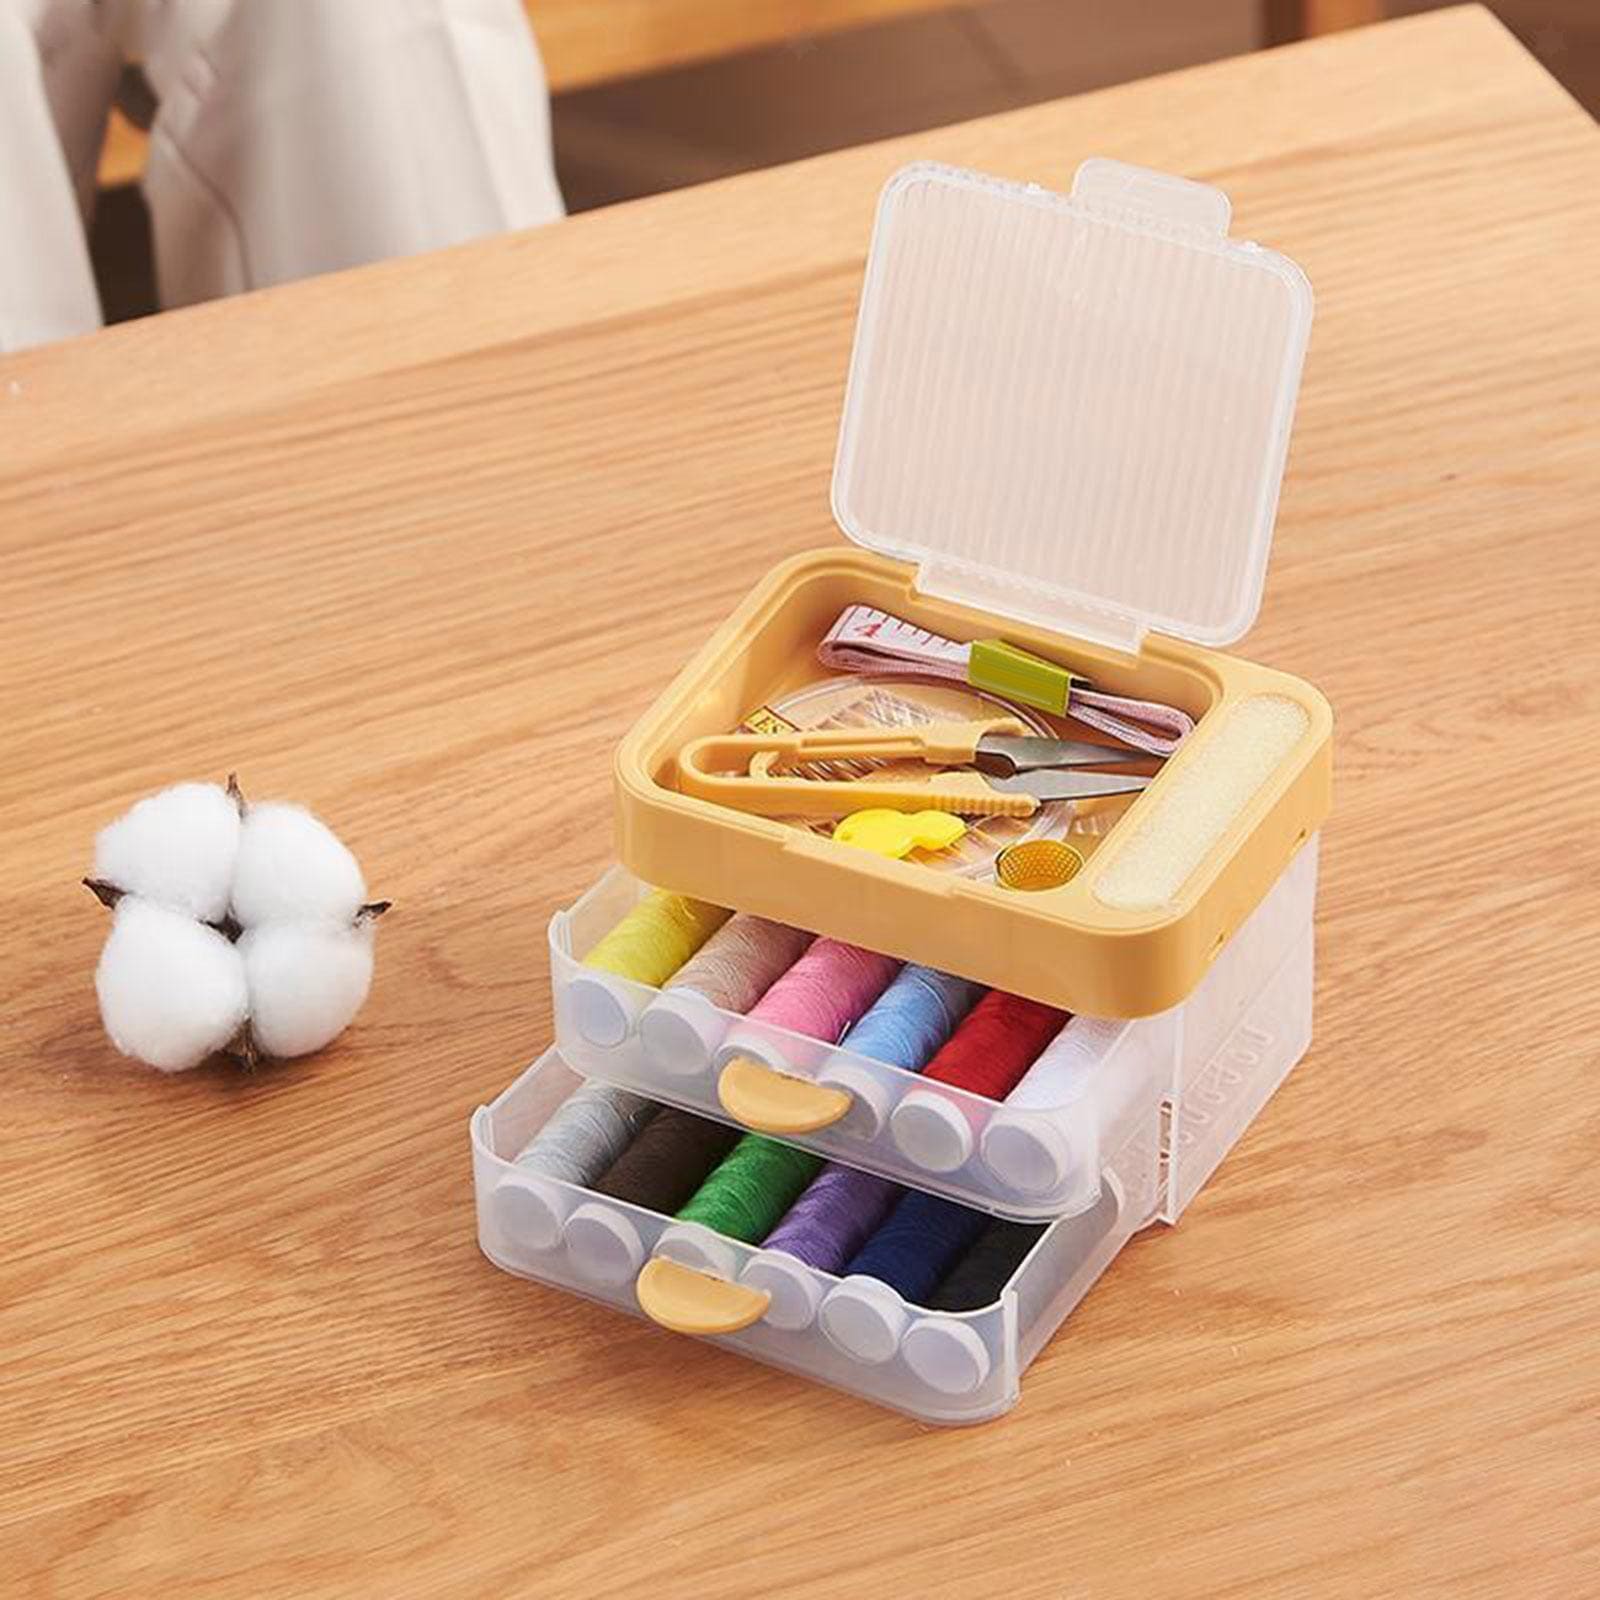 2 Layer Drawer Sewing Box, Portable Sewing Box With Sewing Accessories, Clothes Mending Essential, Basic Sewing Kit Accessory, Travel Small Sewing Kit, Home & Travelling Sewing Accessories